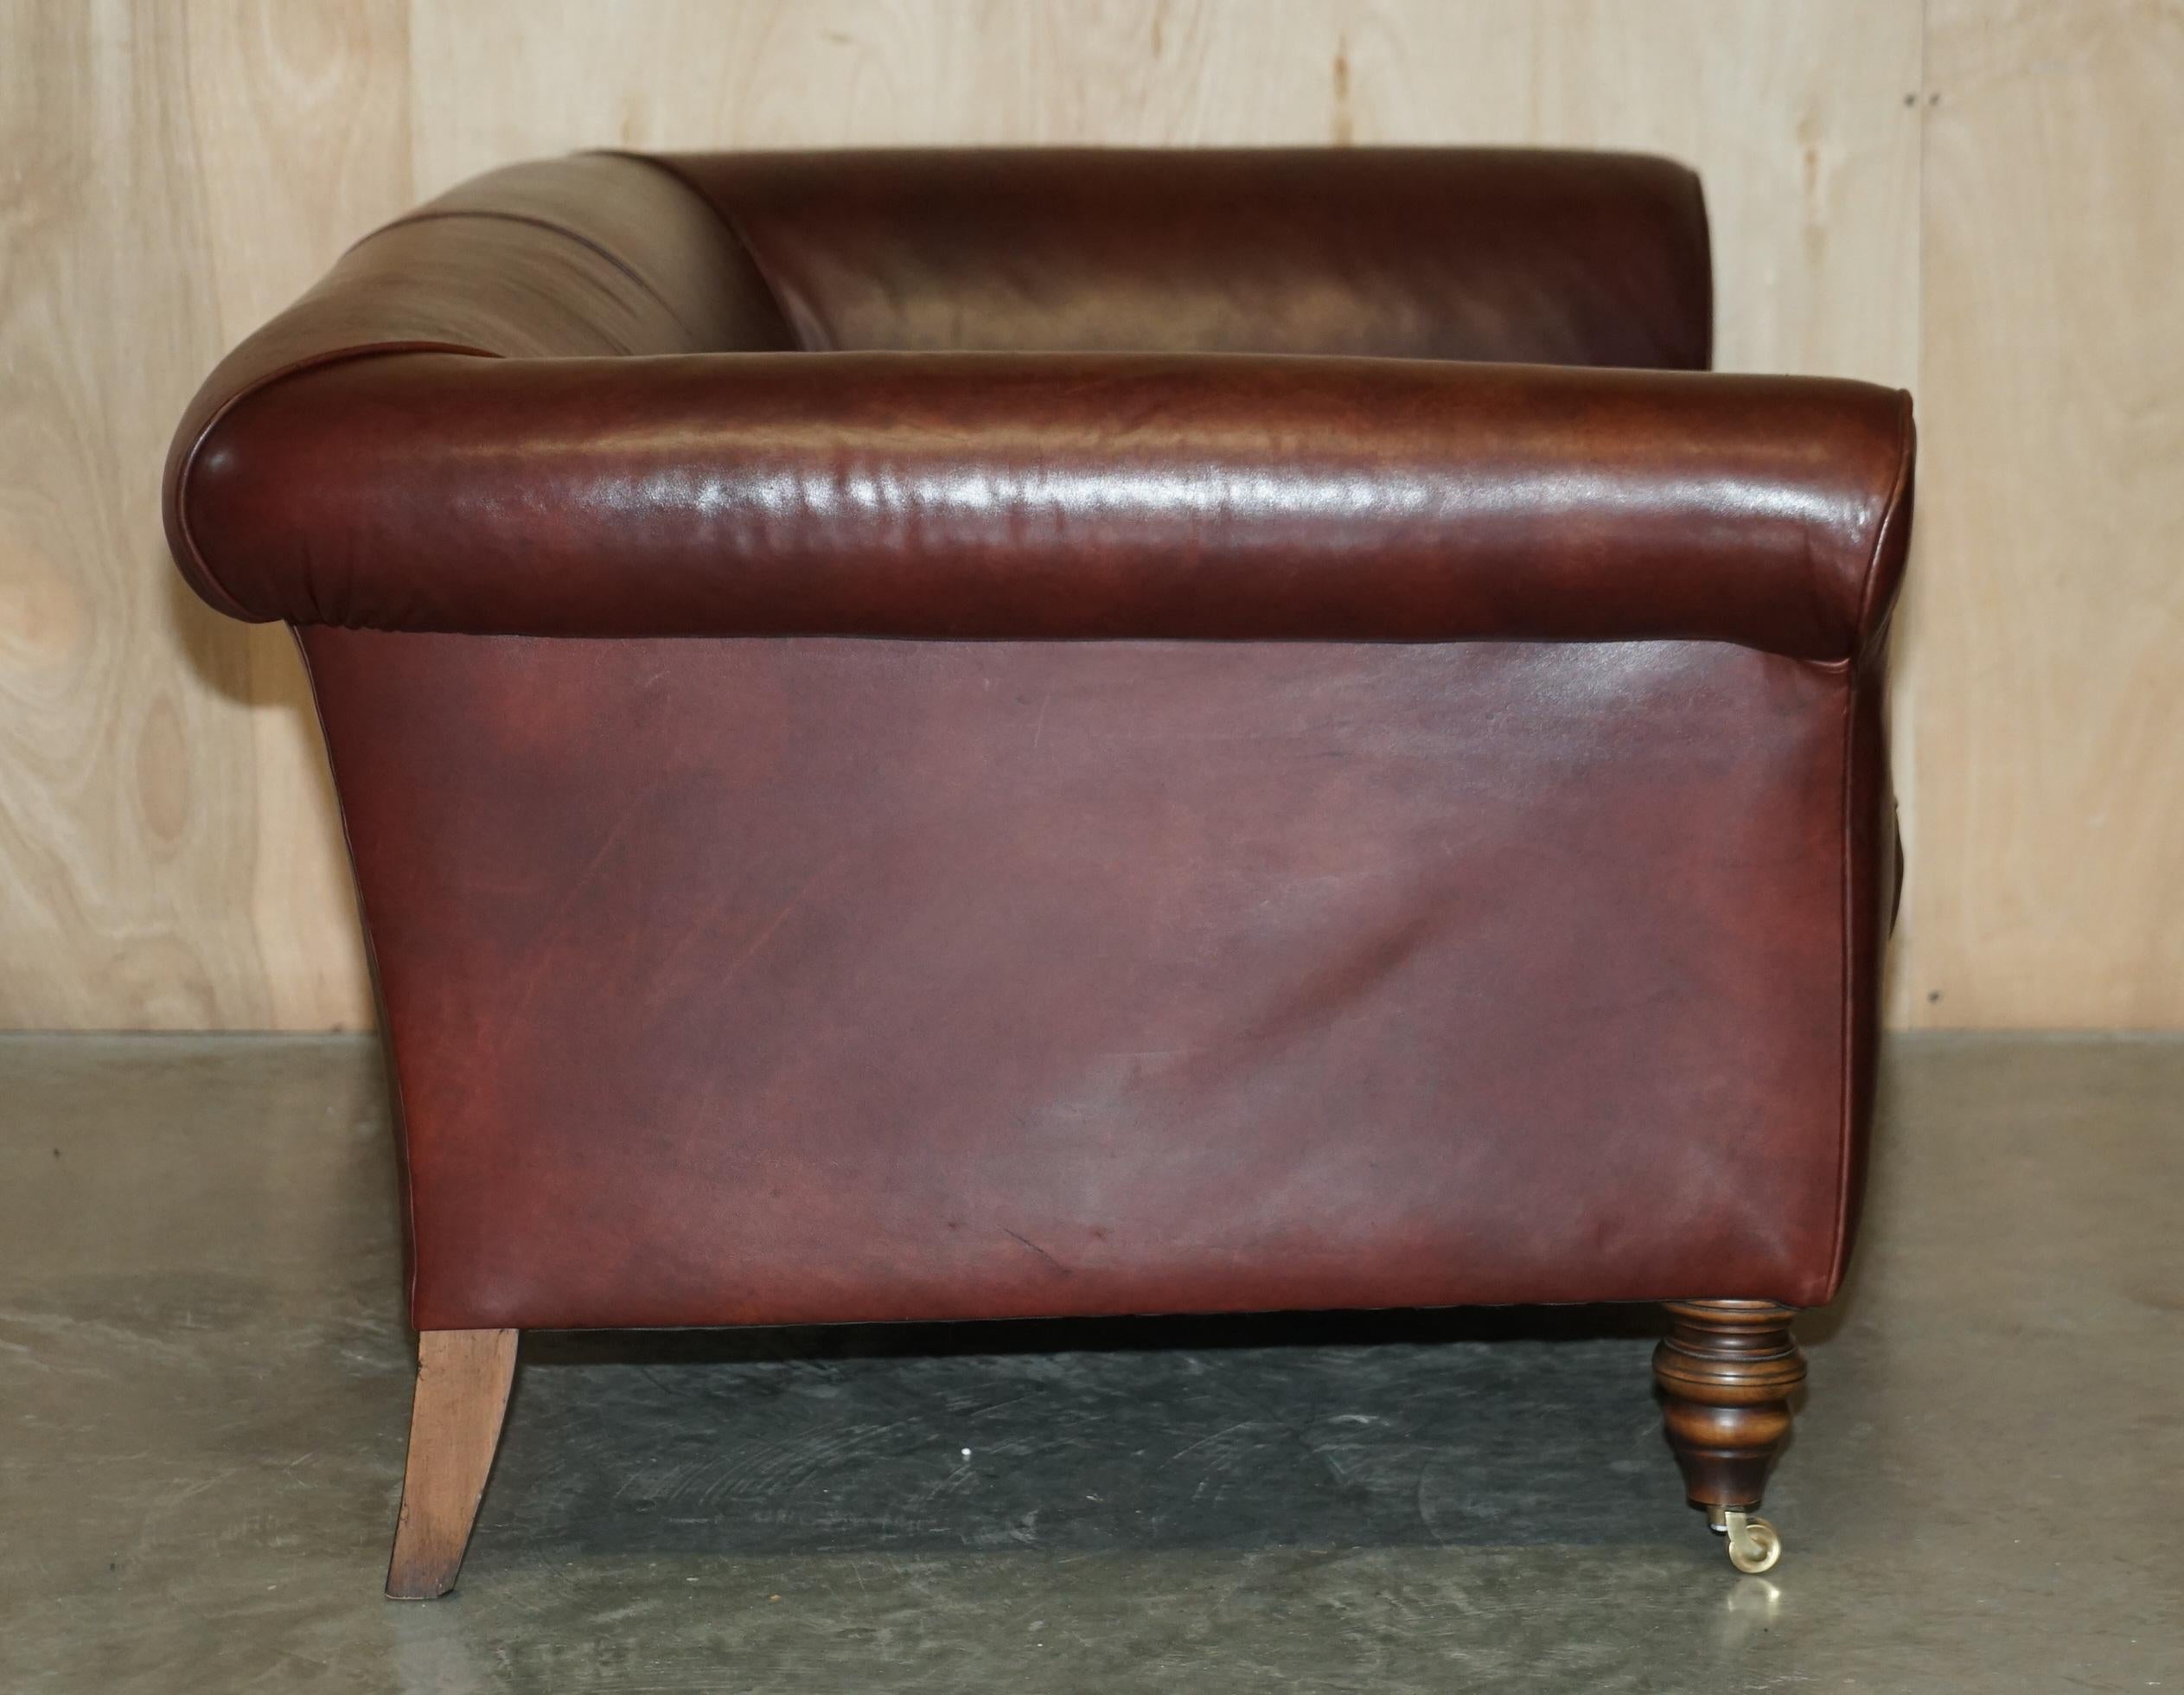 ViNTAGE DYED BROWN LEATHER ART DECO THREE SEAT SOFA FEATHER FILLED SEAT en vente 10